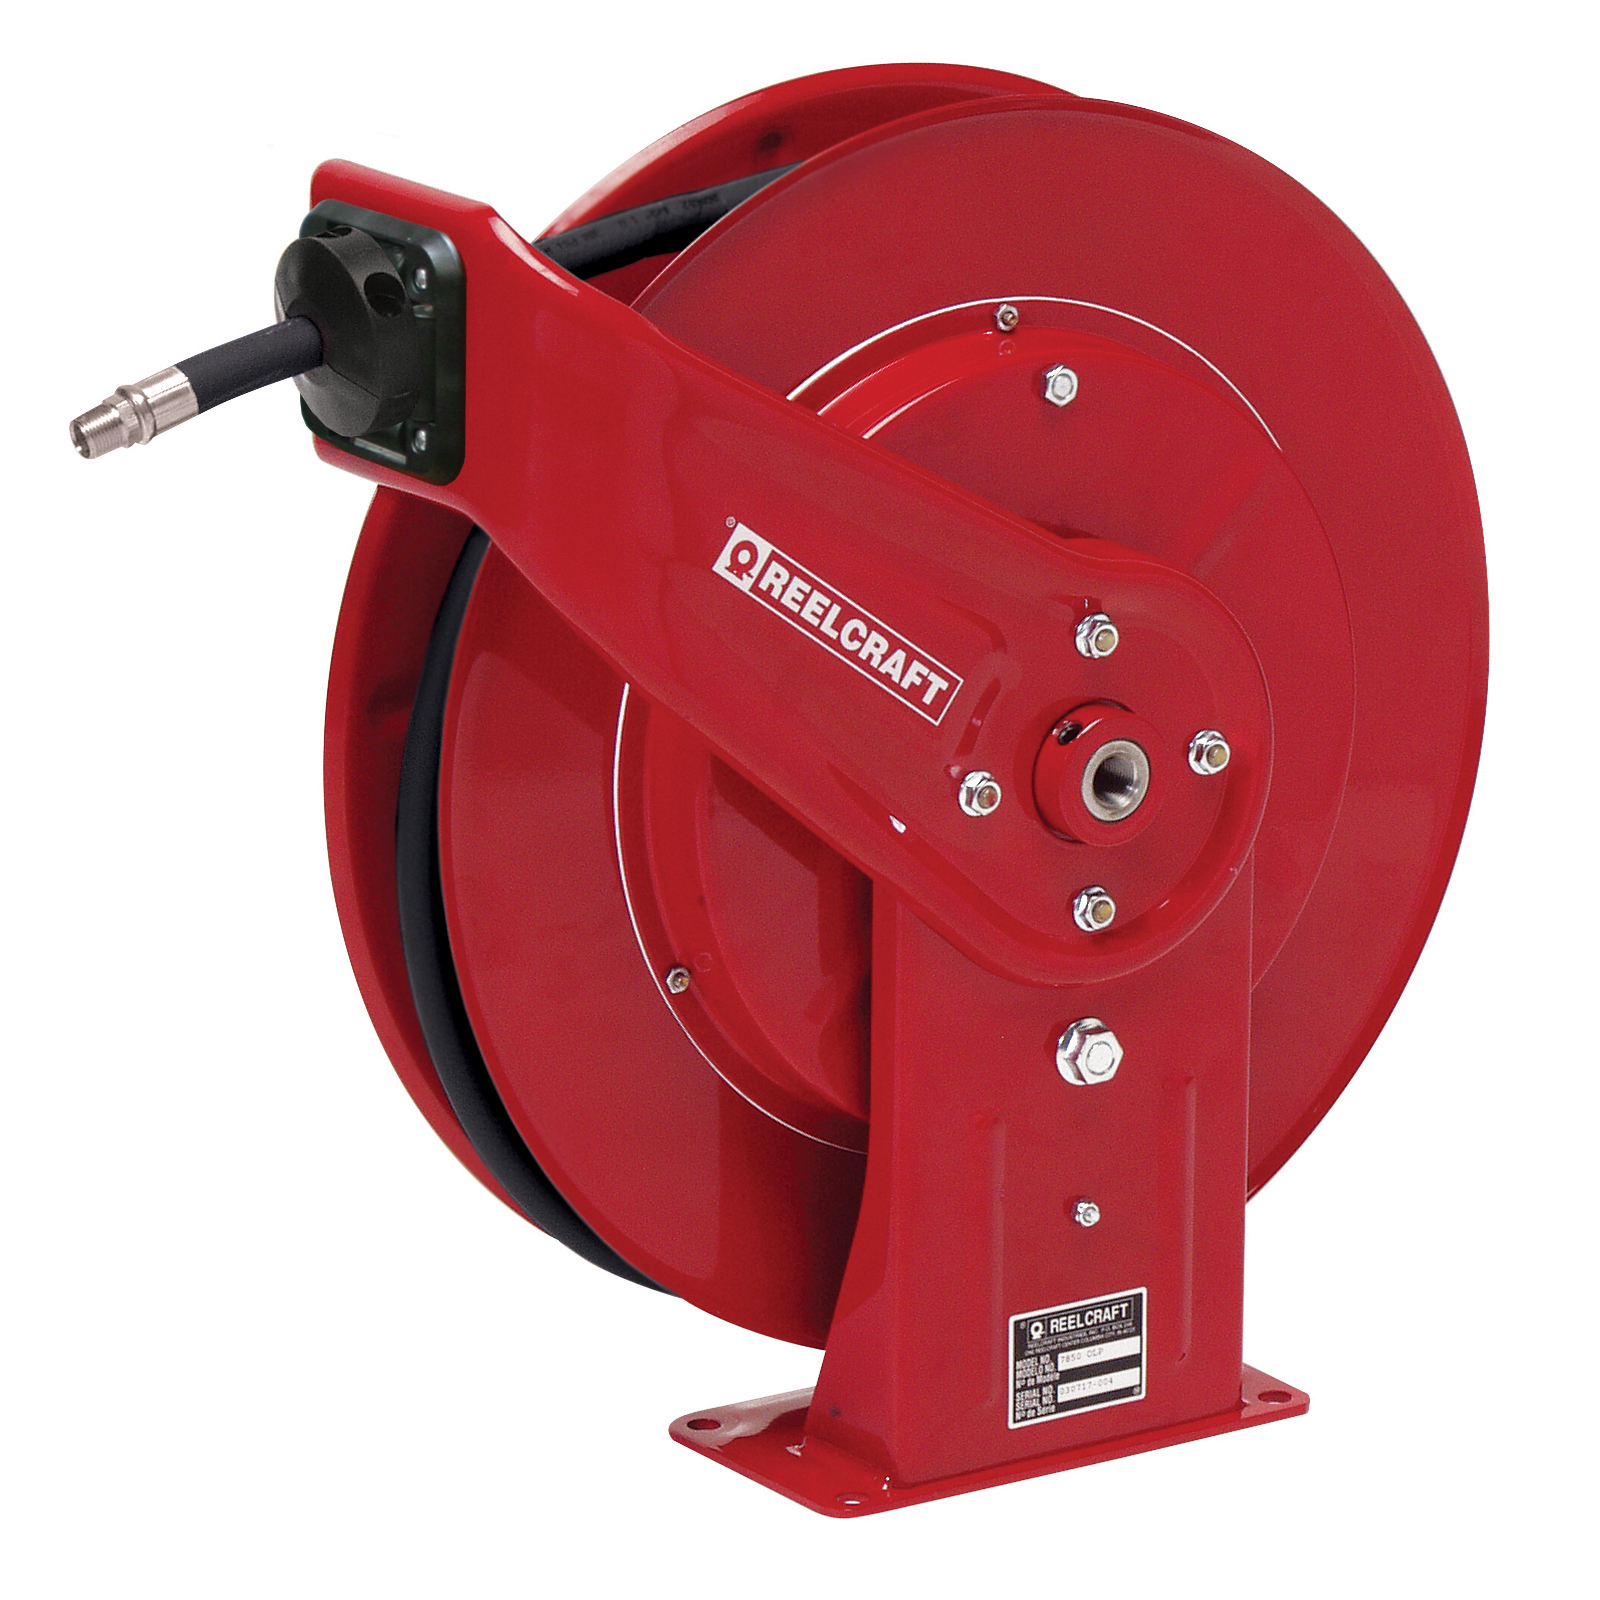 Reelcraft® 7650 OHP 7000 Heavy Duty High Pressure Hose Reel With Hose, 3/8 in ID x 0.73 in OD x 50 ft L Hose, 4800 psi Pressure, 19-3/4 in Dia x 3-7/8 in W Reel, Domestic